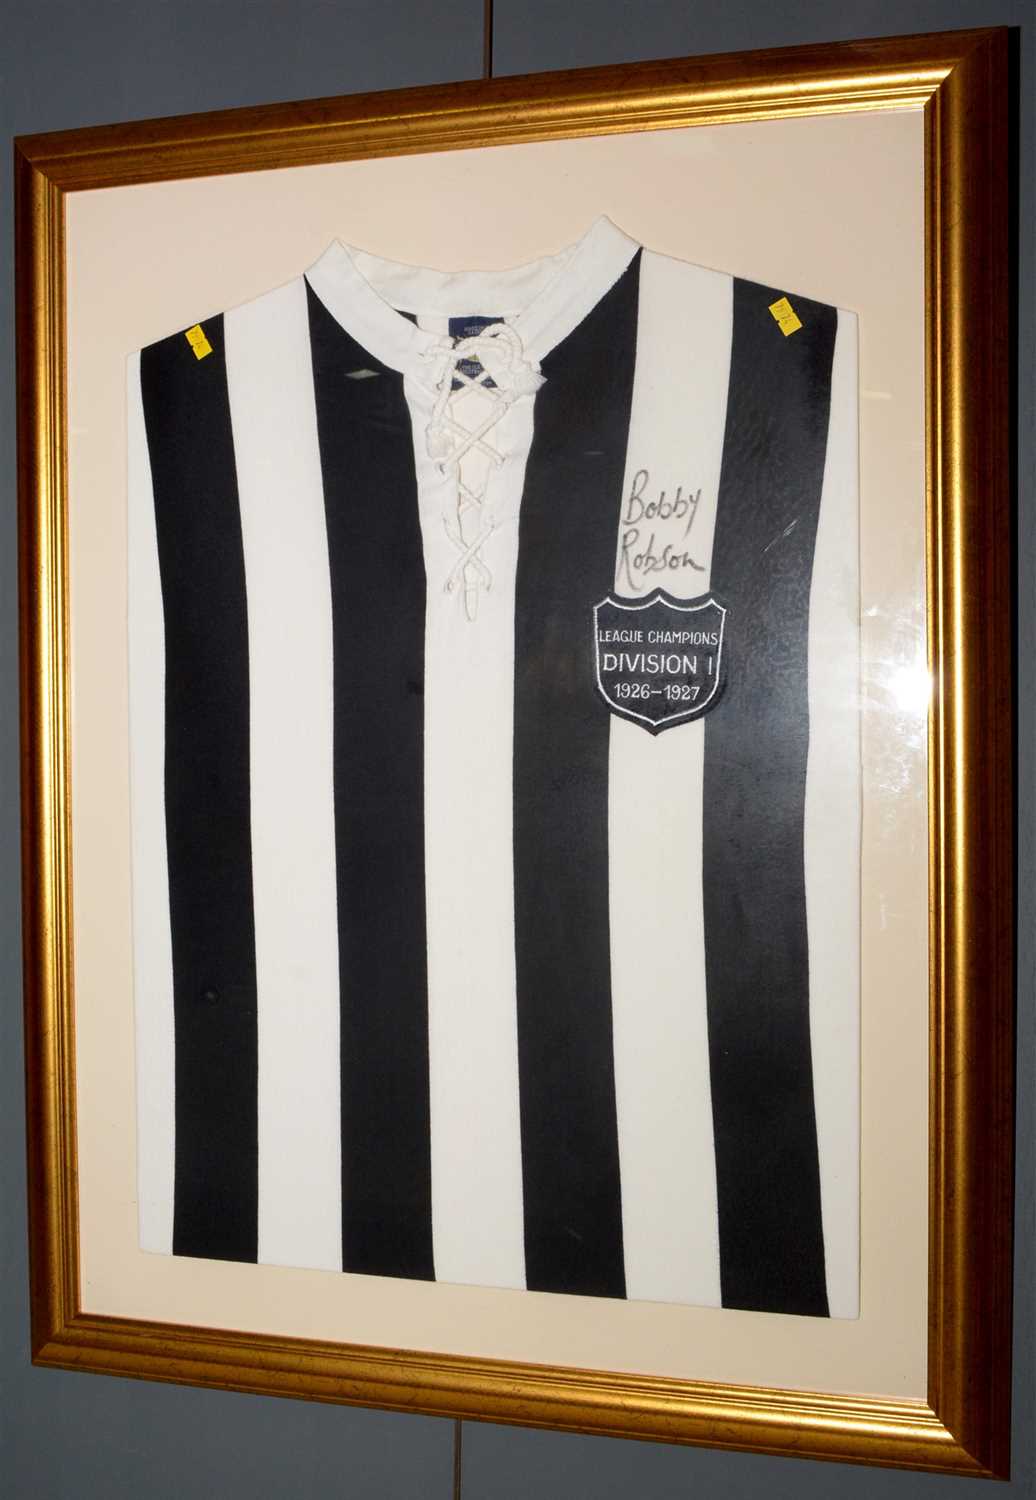 Lot 1545 - Signed Newcastle Shirt by Bobby Robson